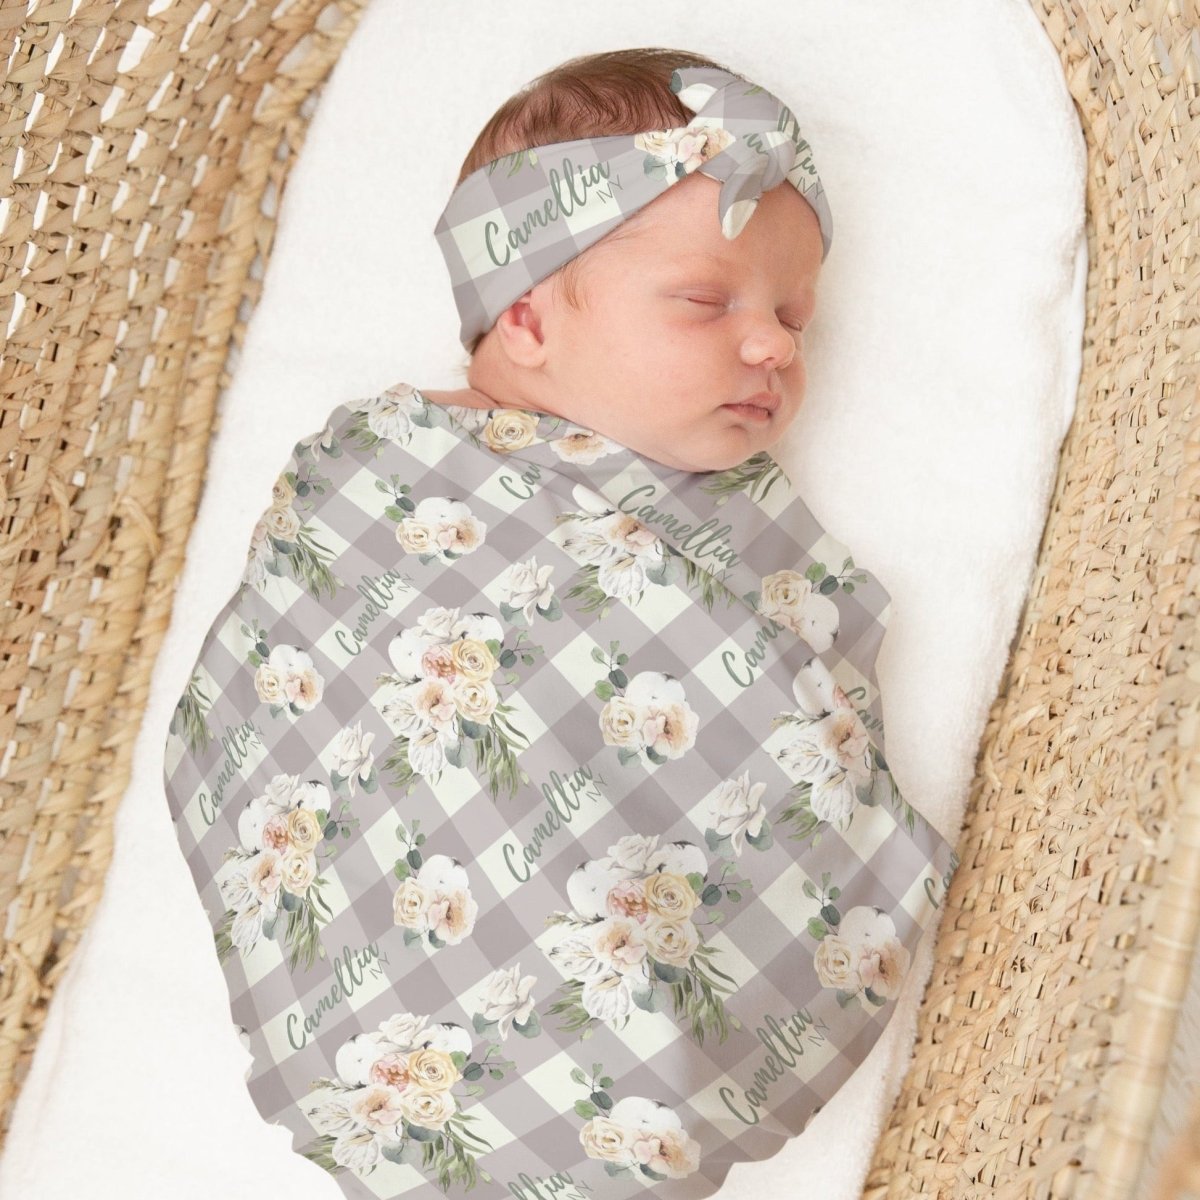 Farmhouse Floral Personalized Swaddle Blanket Set - Farmhouse Floral, gender_girl, text